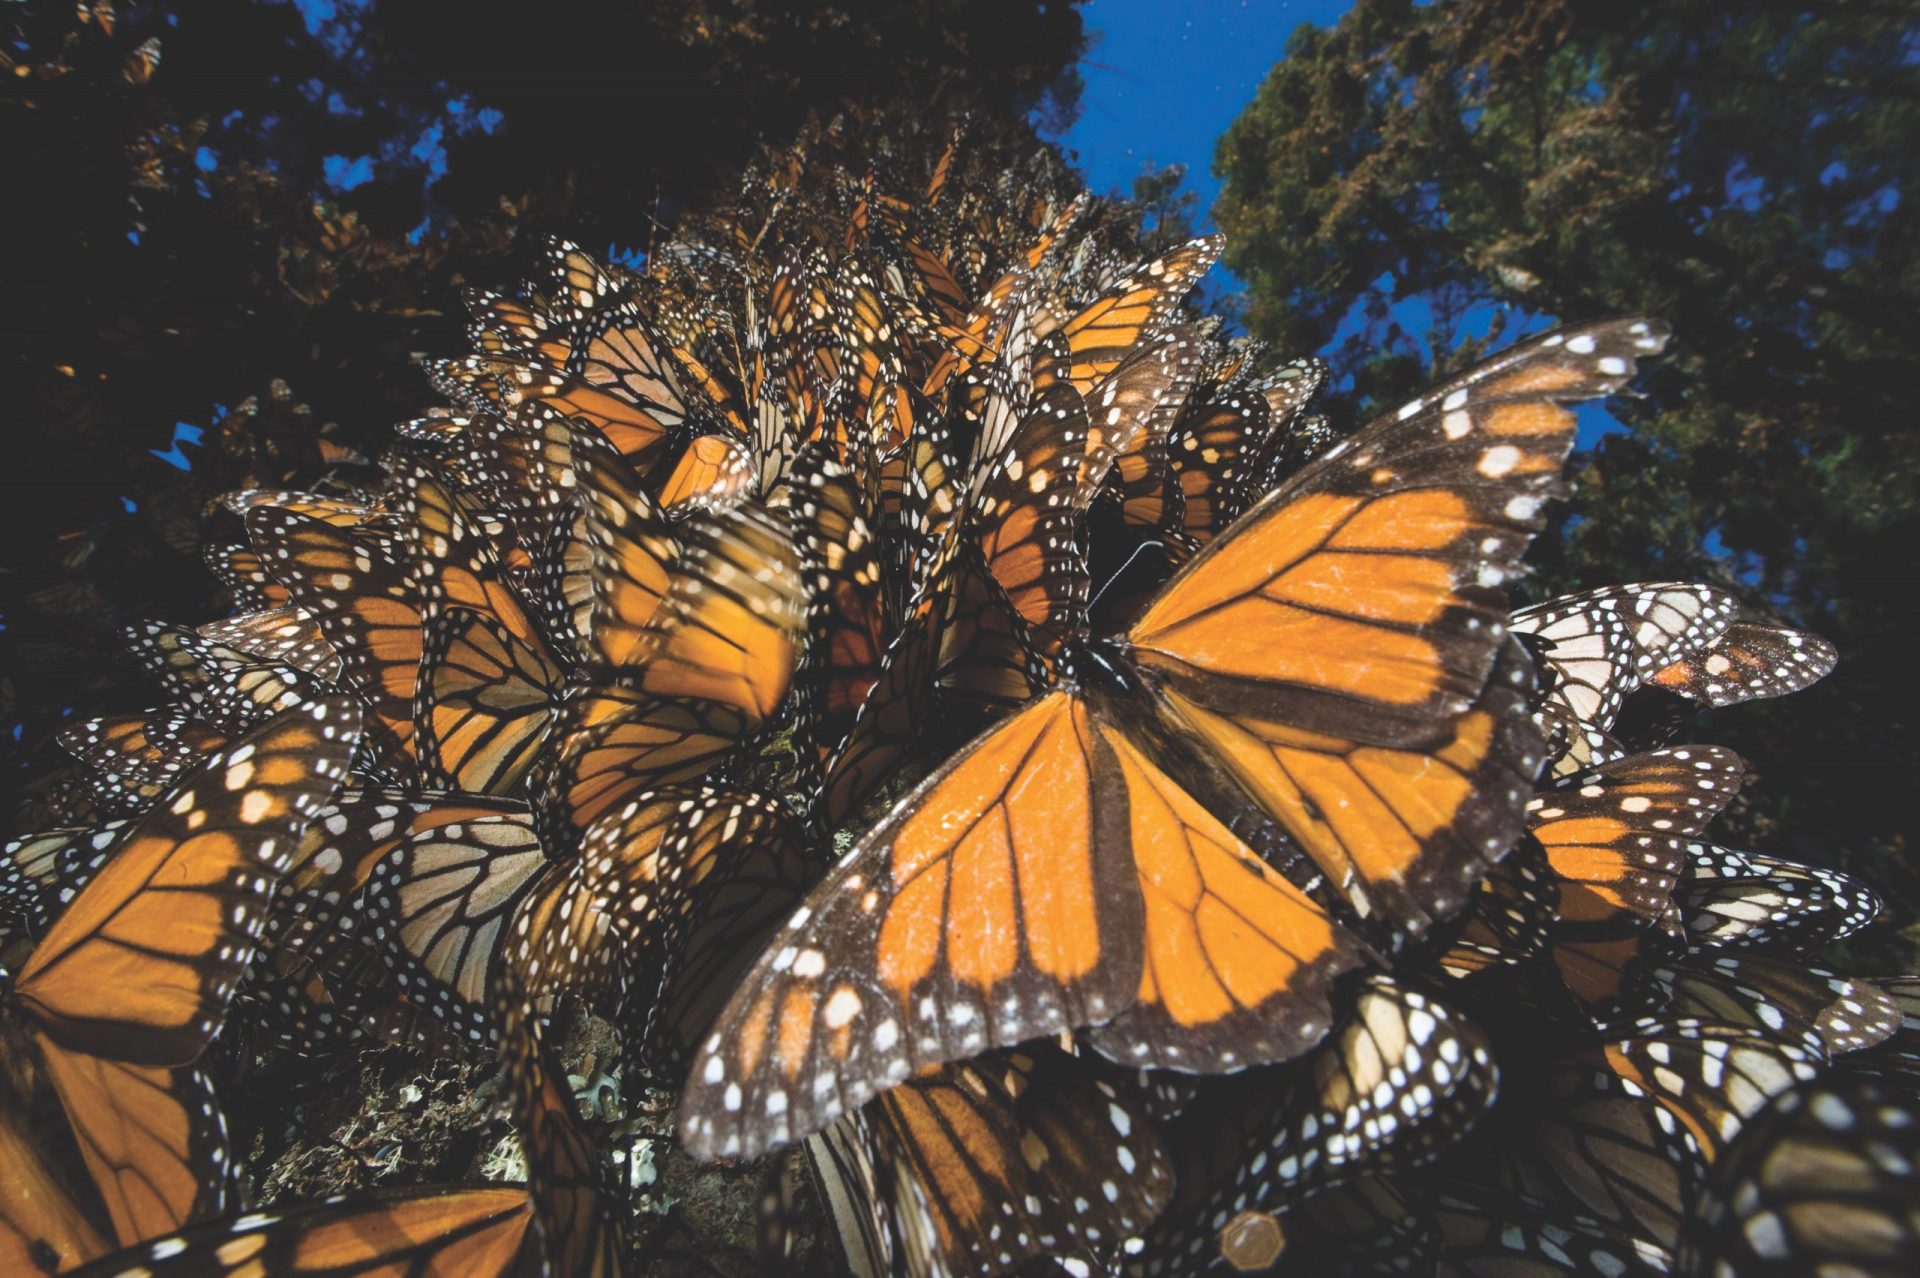 many monarch butterflies at rest